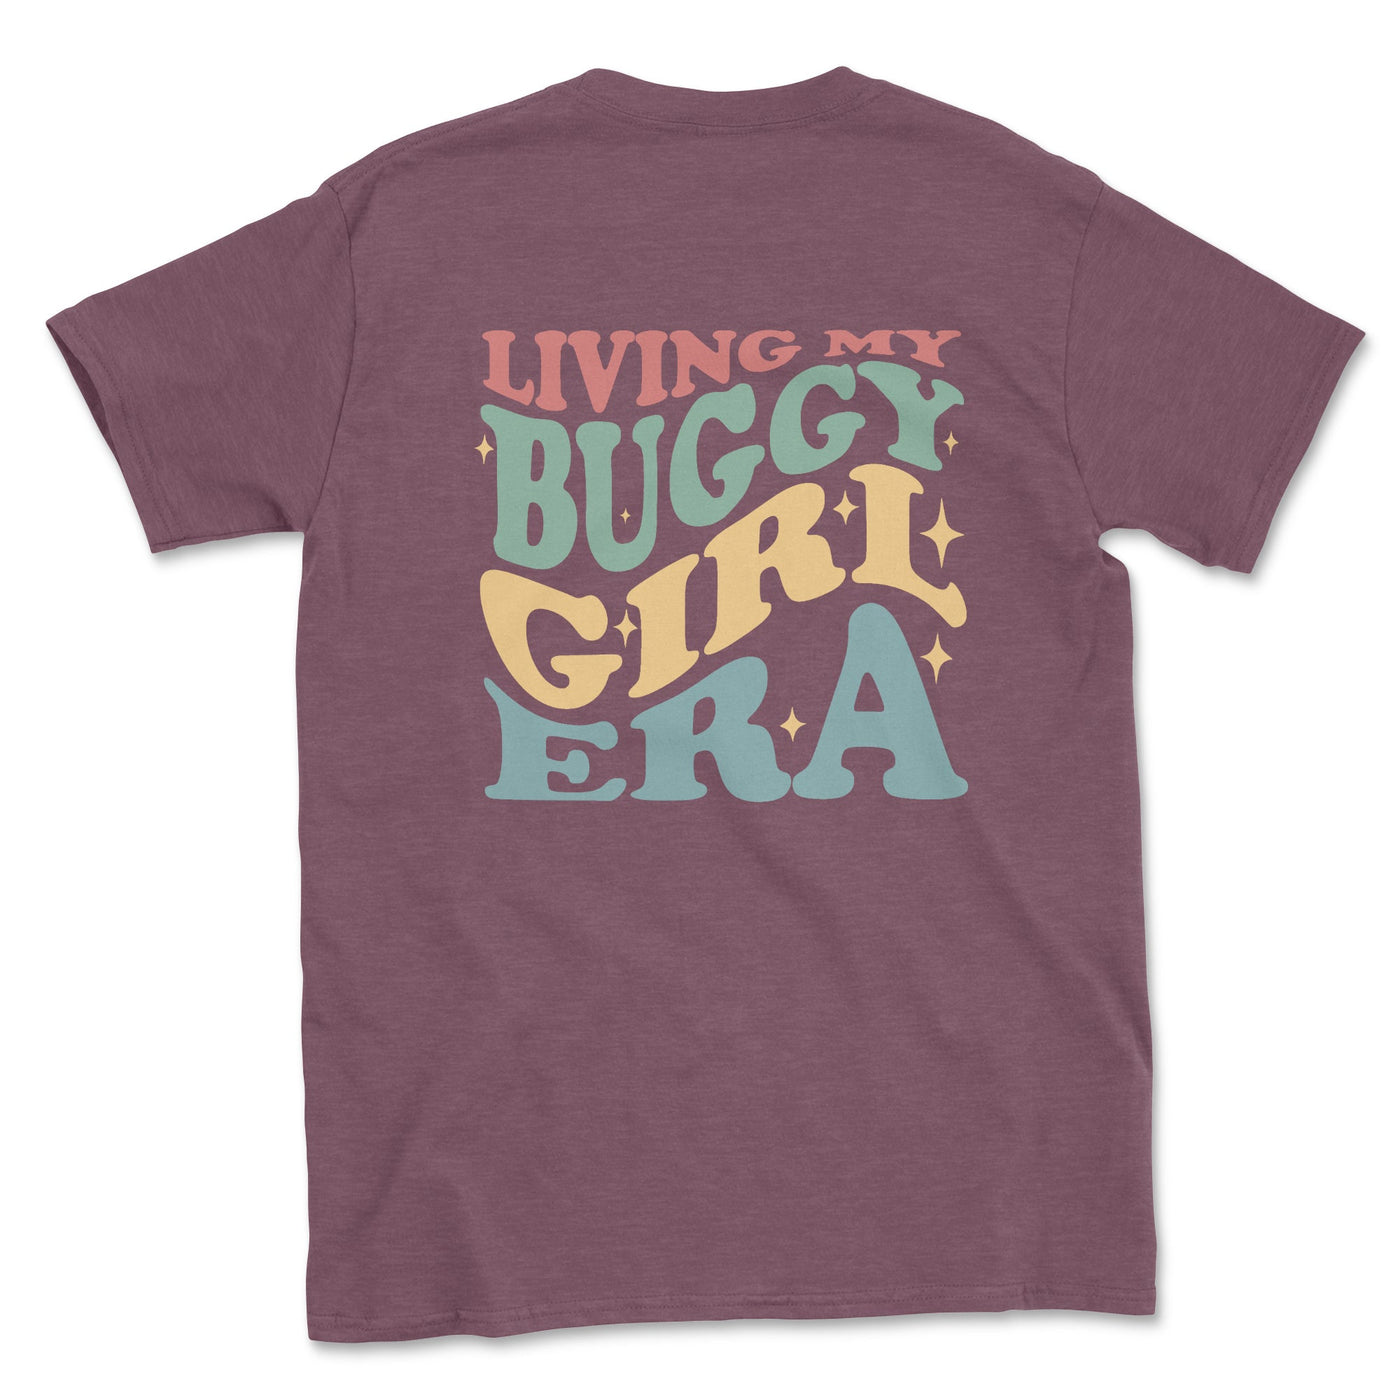 Living My Buggy Girl Era Graphic Tee - Goats Trail Off-Road Apparel Company